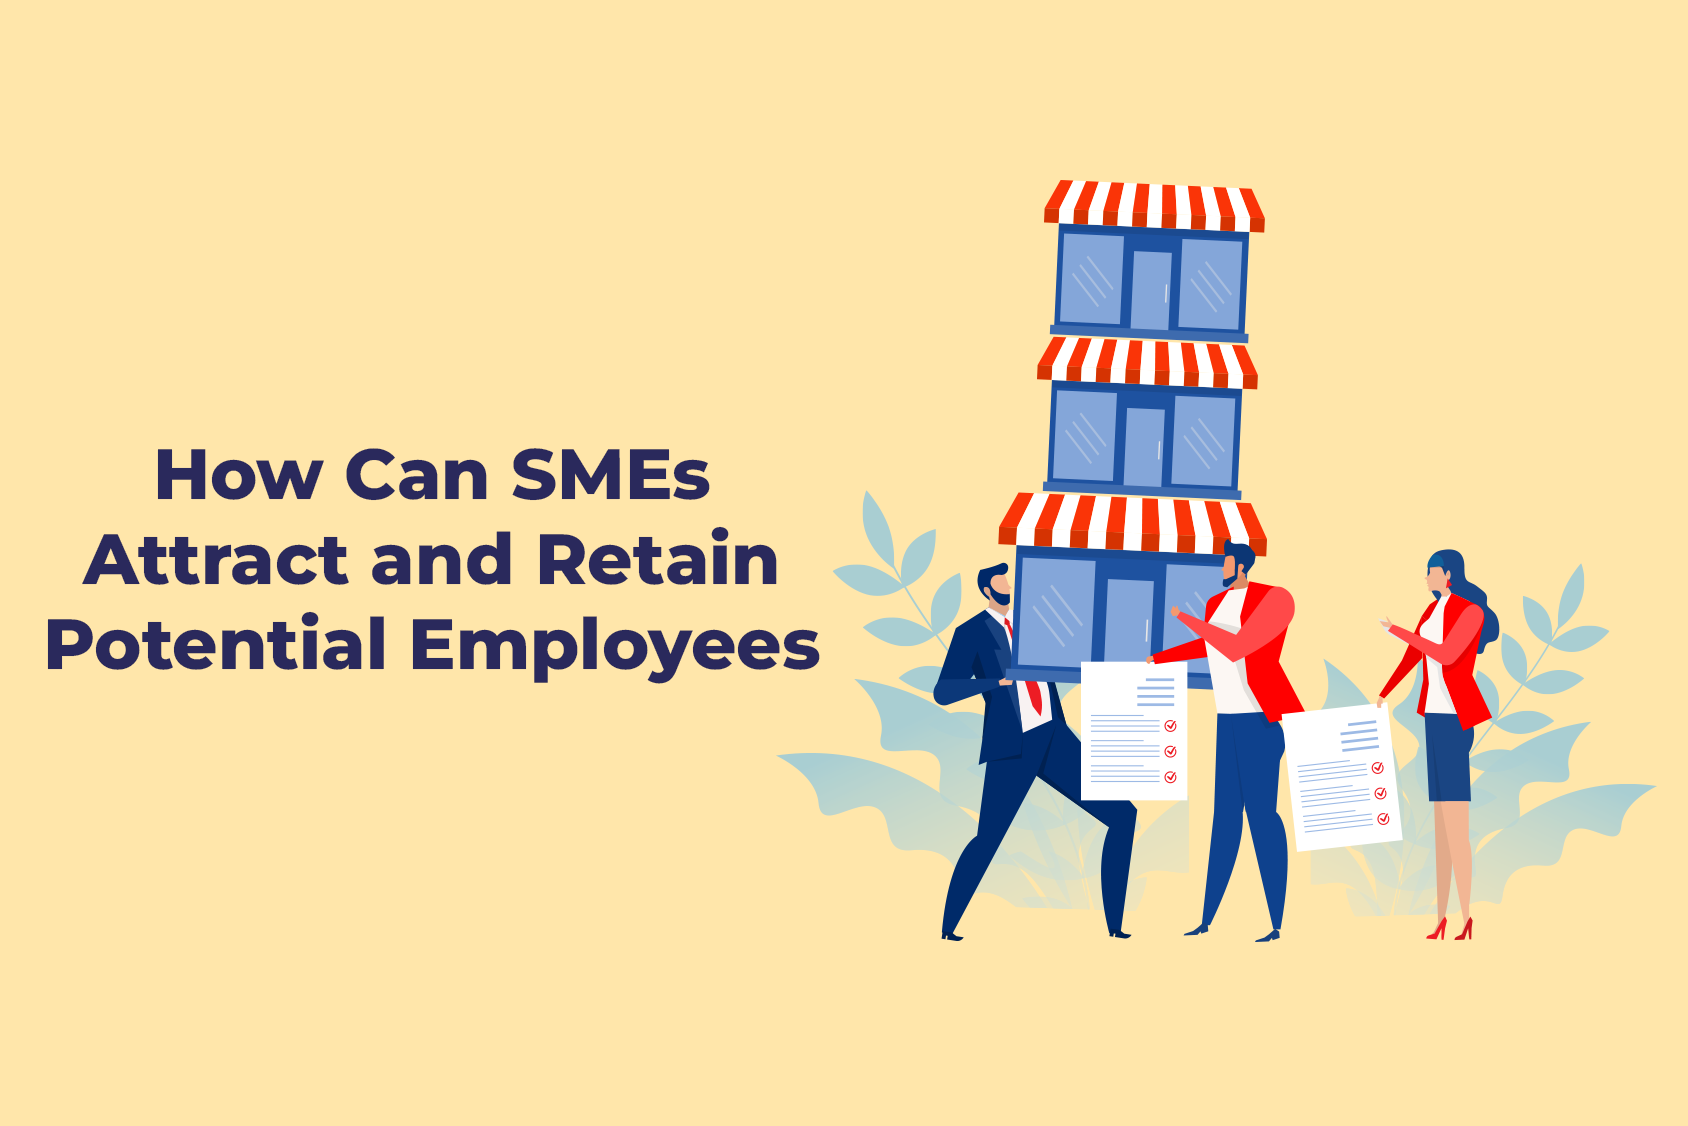 How Can SMEs Attract and Retain Employees